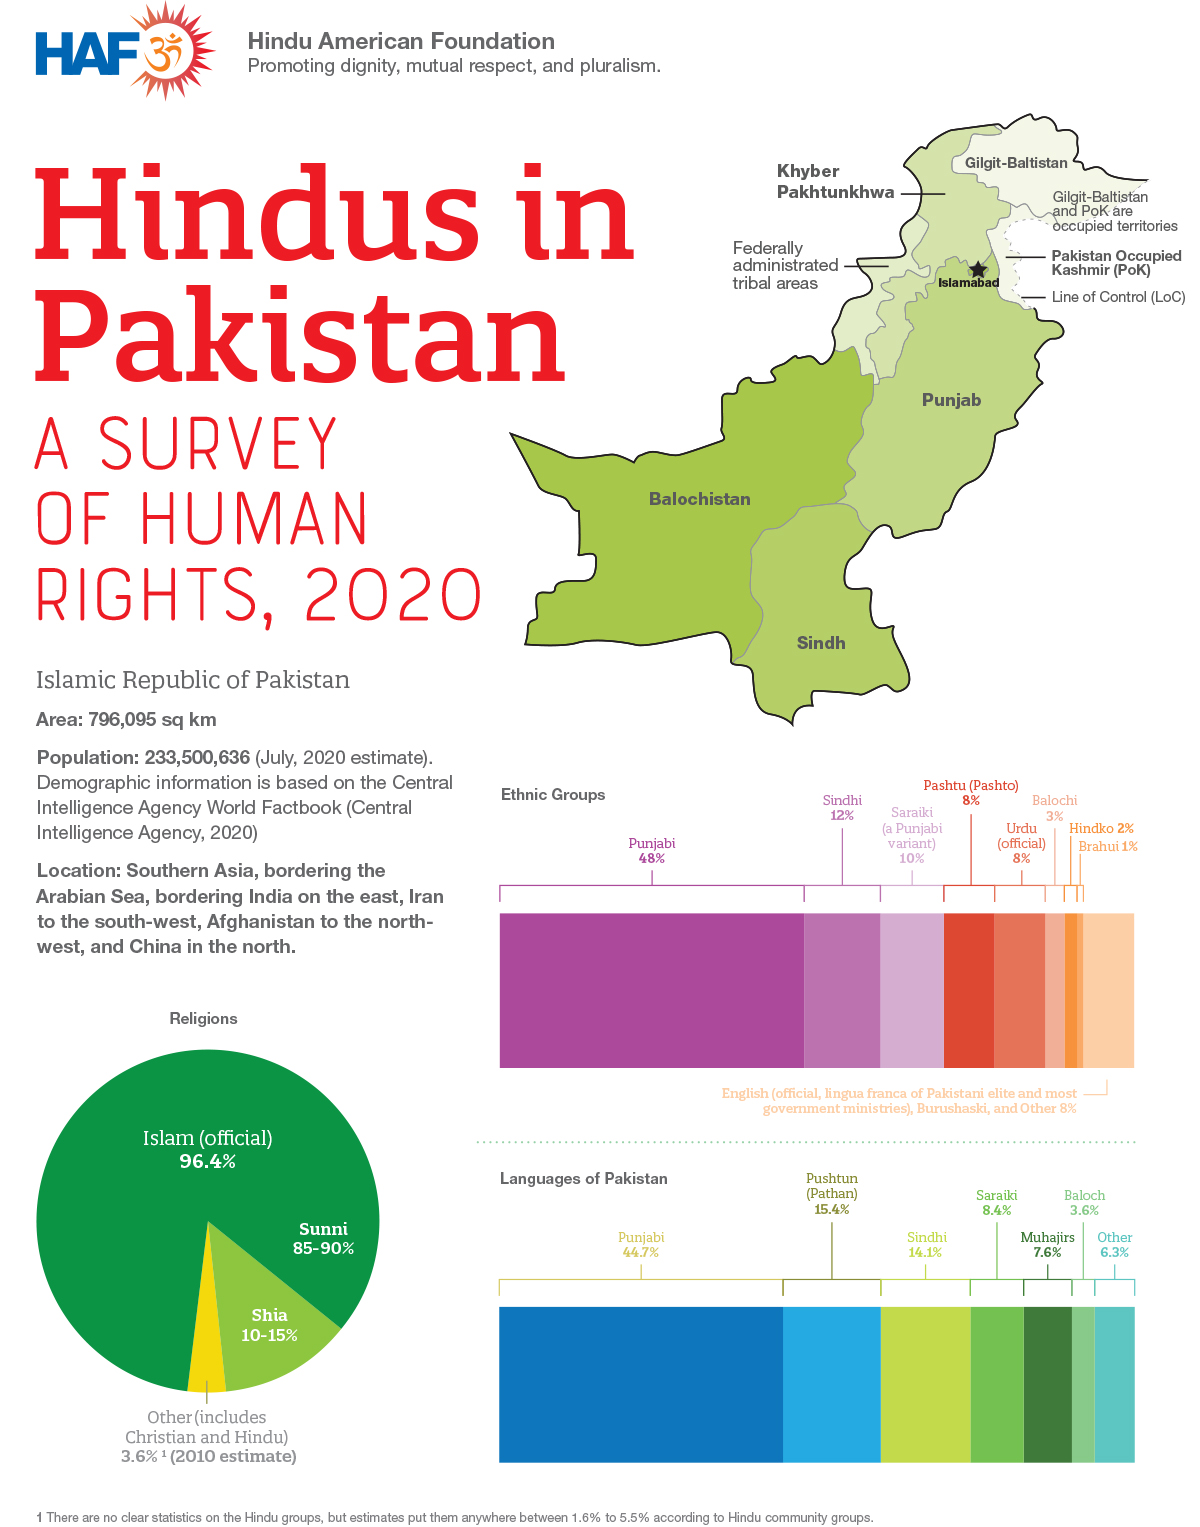 how can we protect human rights in pakistan essay